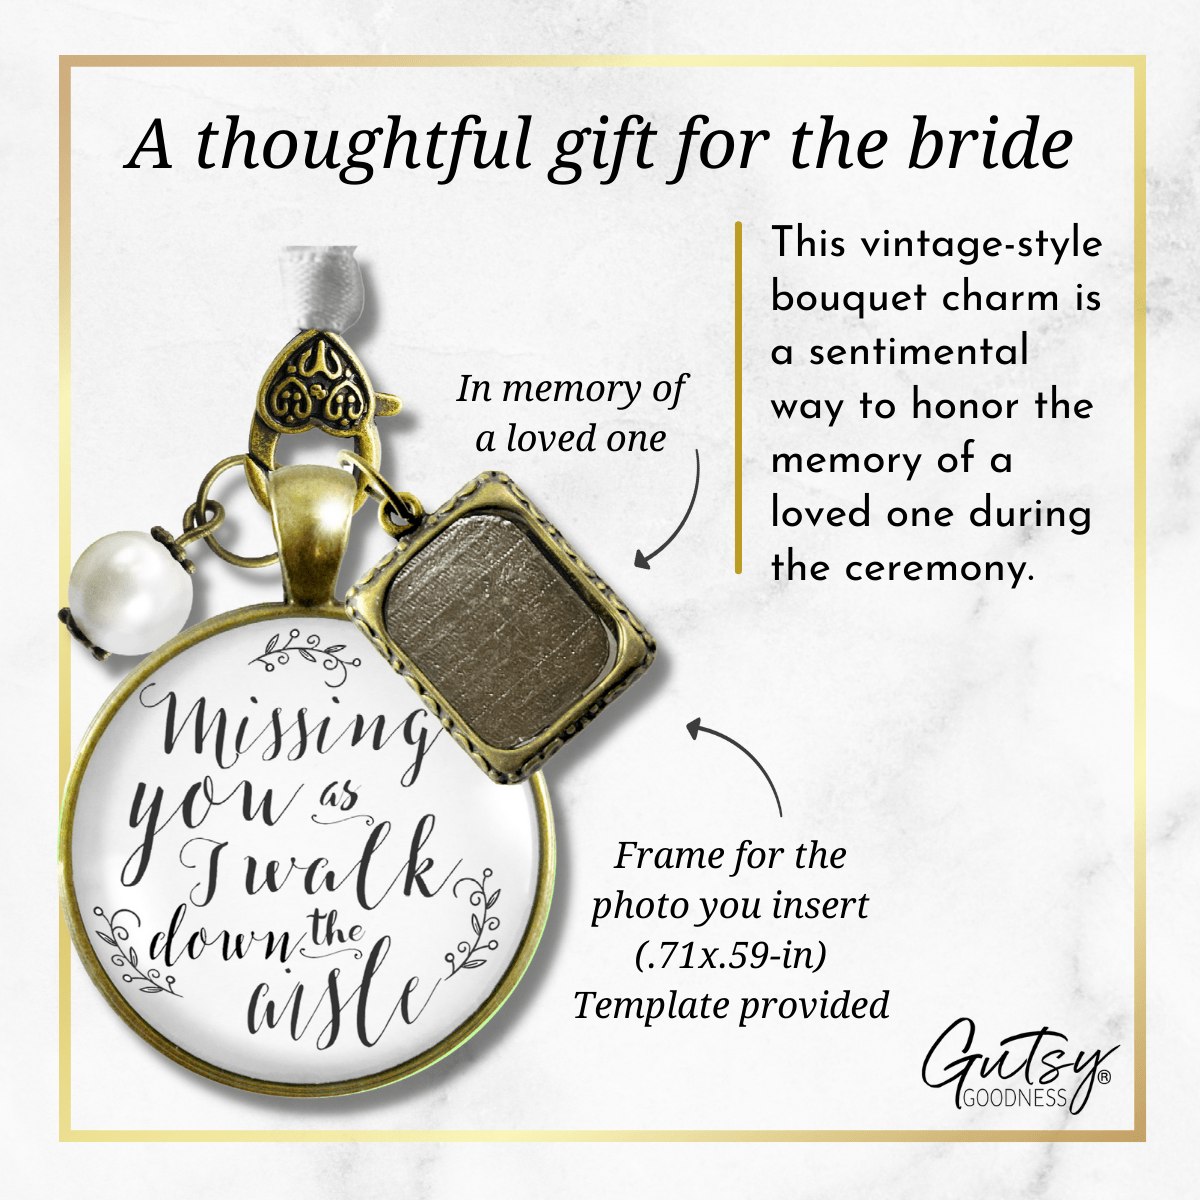 Bouquet Wedding Charm Missing You As I Walk Memorial White Bridal Photo Jewelry - Gutsy Goodness Handmade Jewelry Gifts